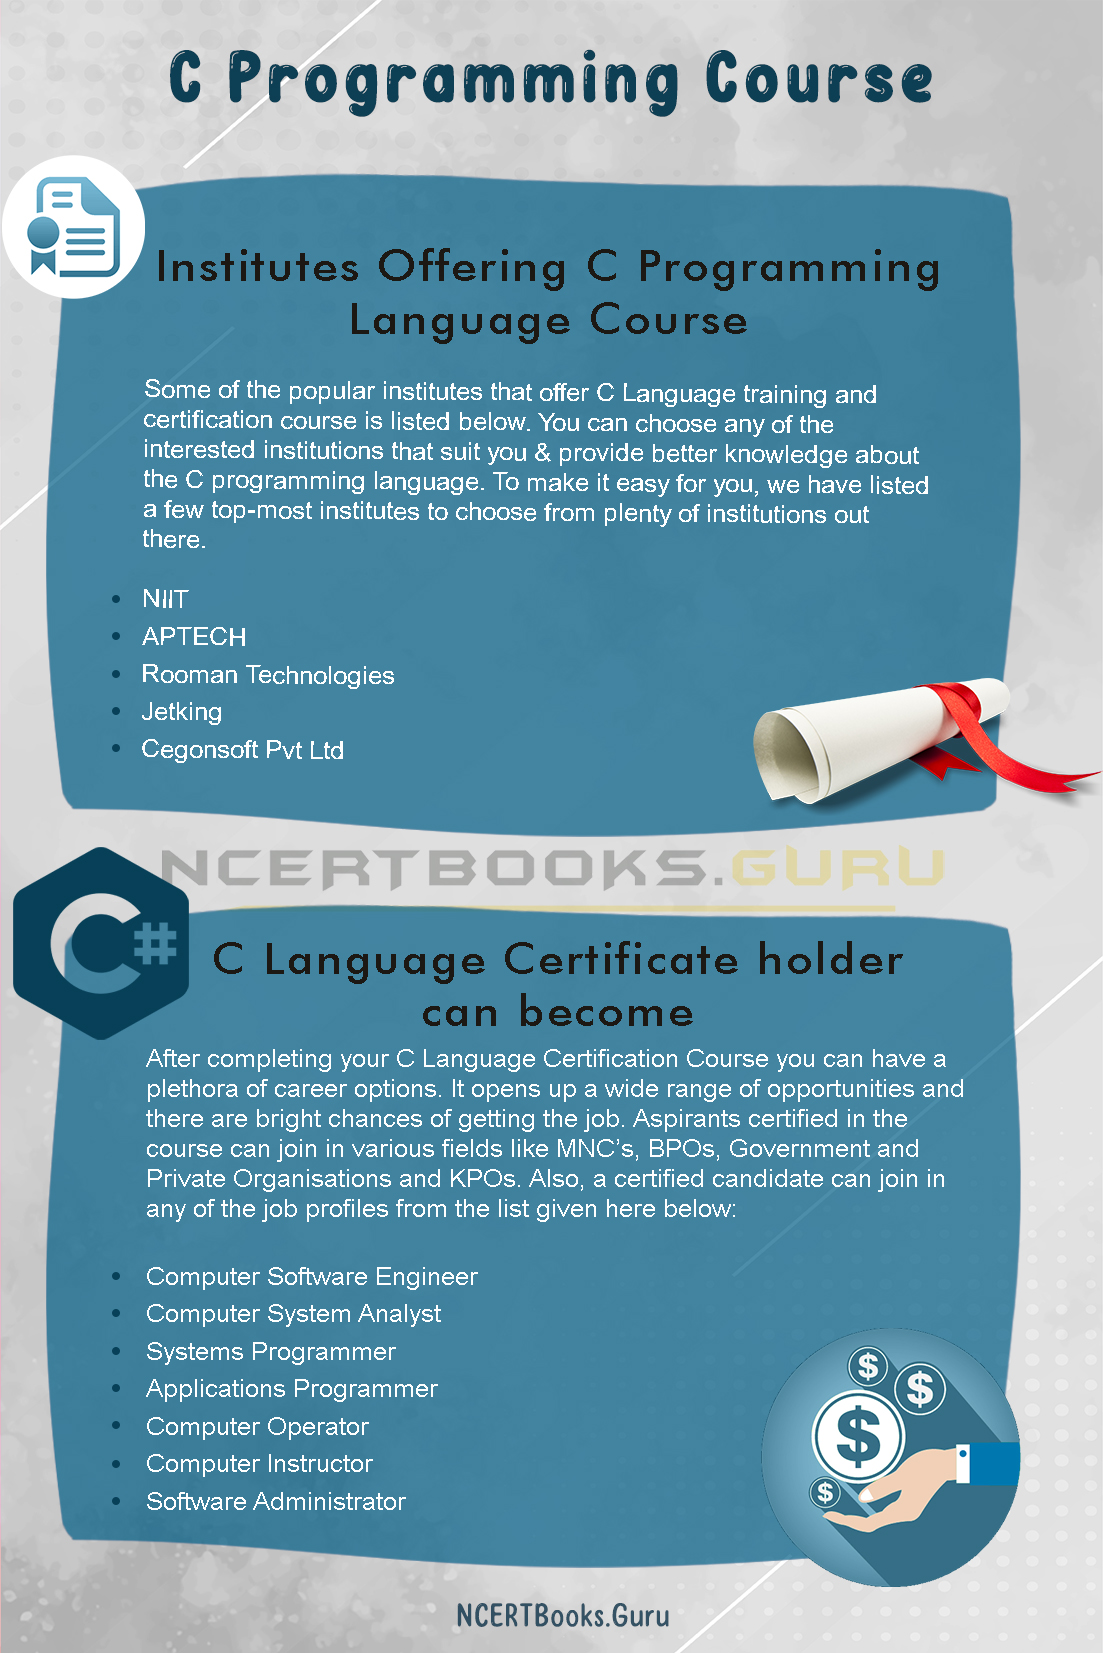 Be a Master Of C Programming With CETPA's Online Training Program